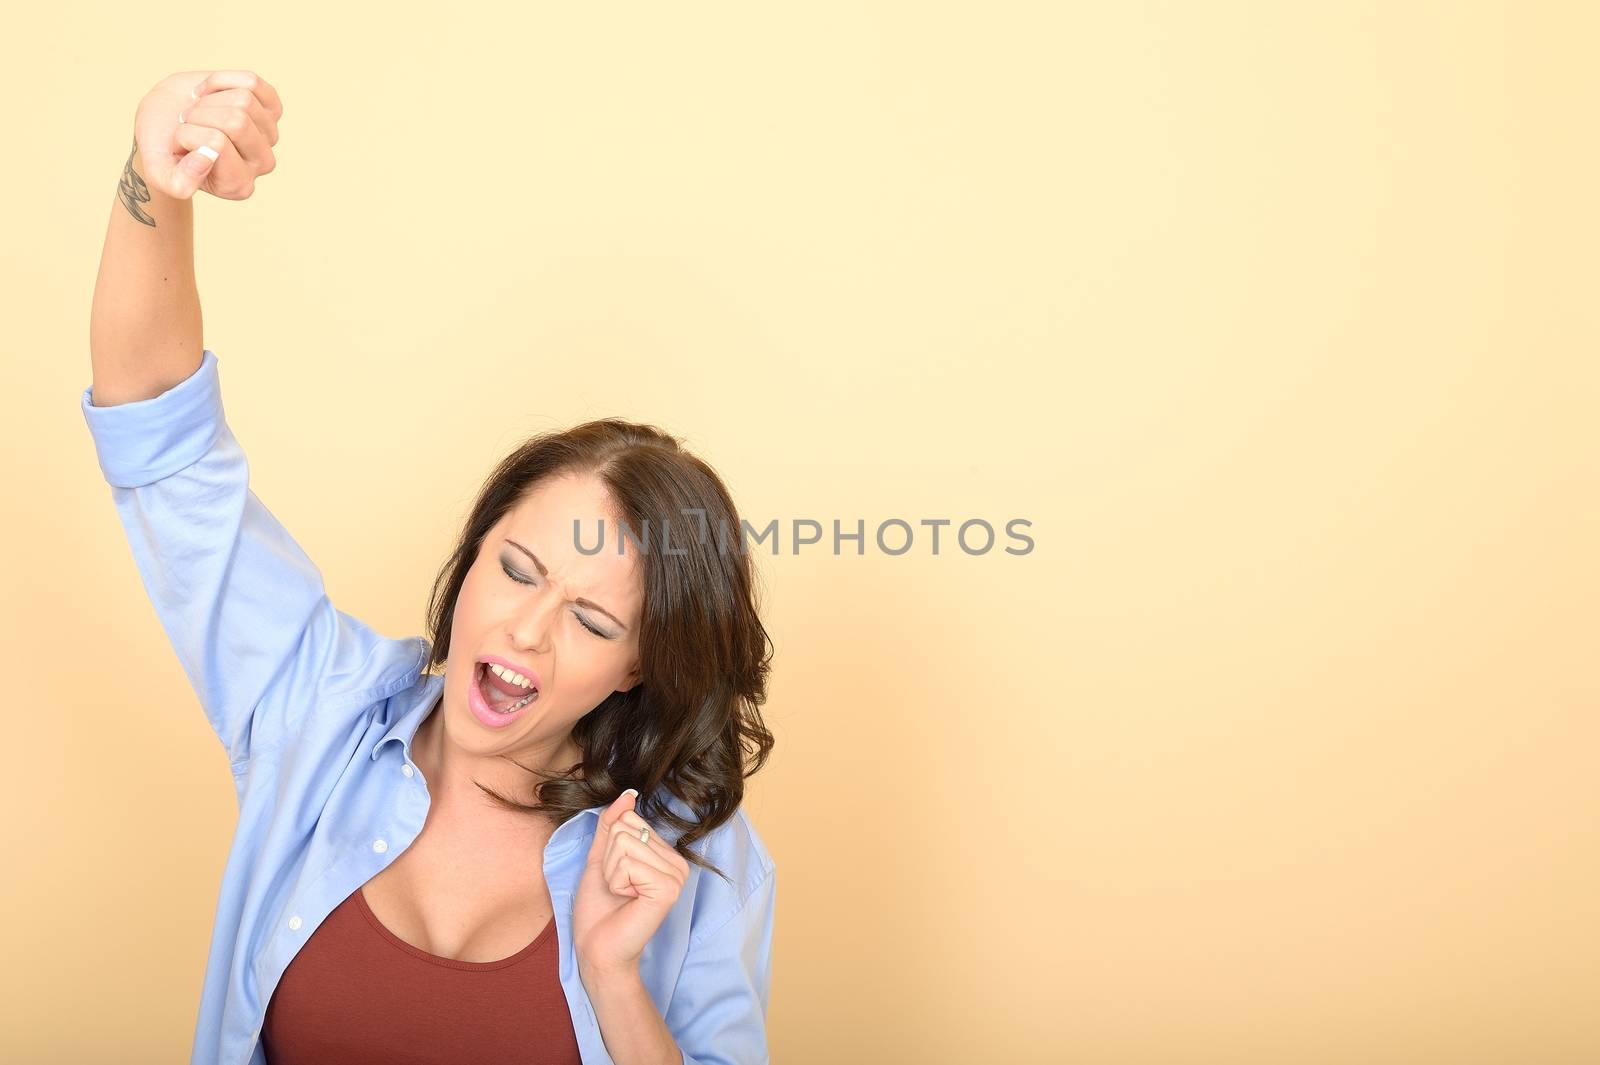 Young Woman Sitting on the Floor Wearing a Blue Shirt and White  by Whiteboxmedia